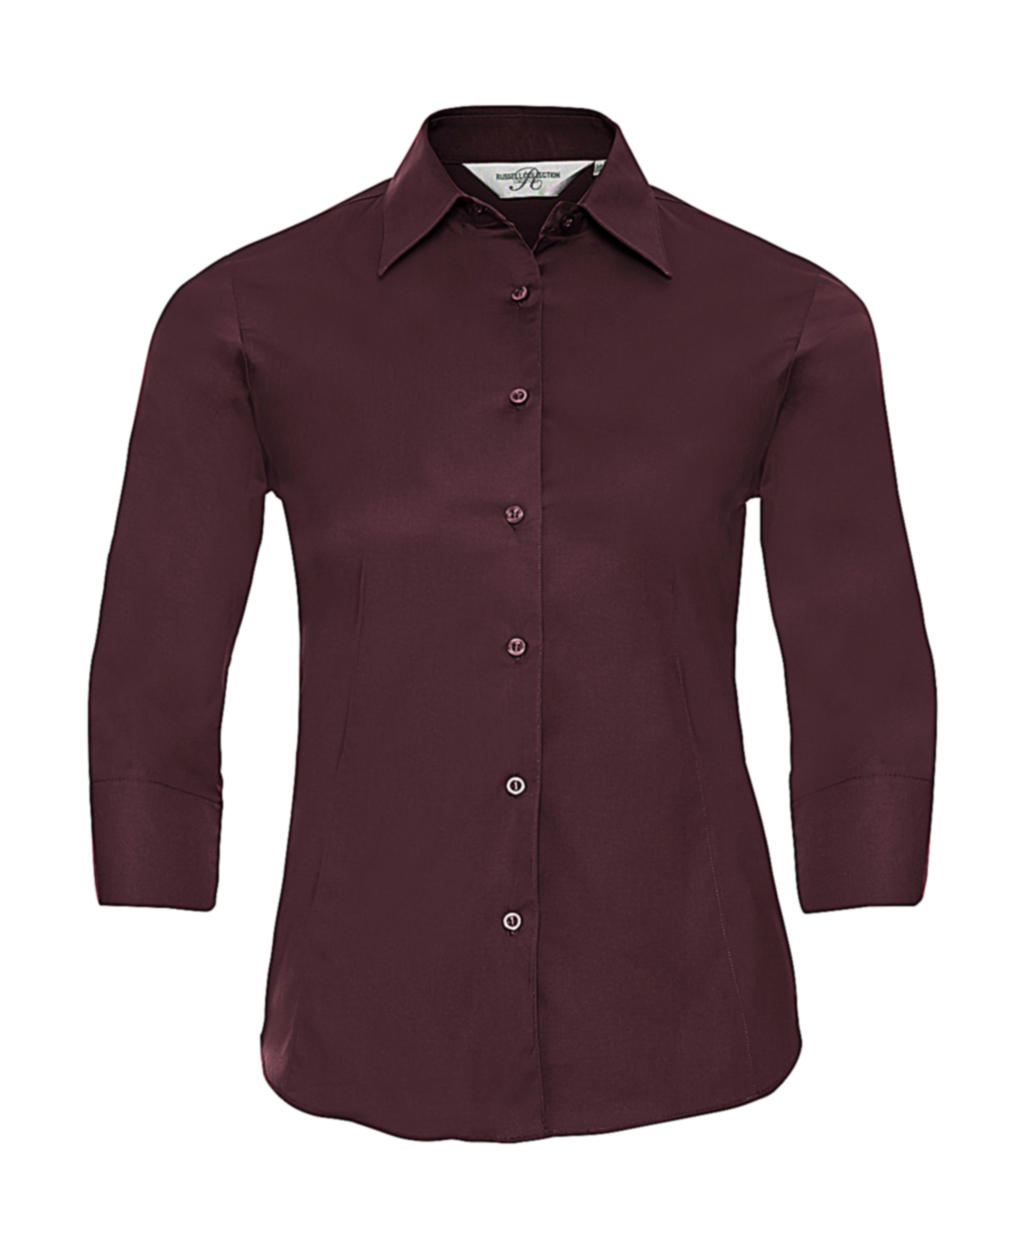  Ladies 3/4 Sleeve Easy Care Fitted Shirt in Farbe Port